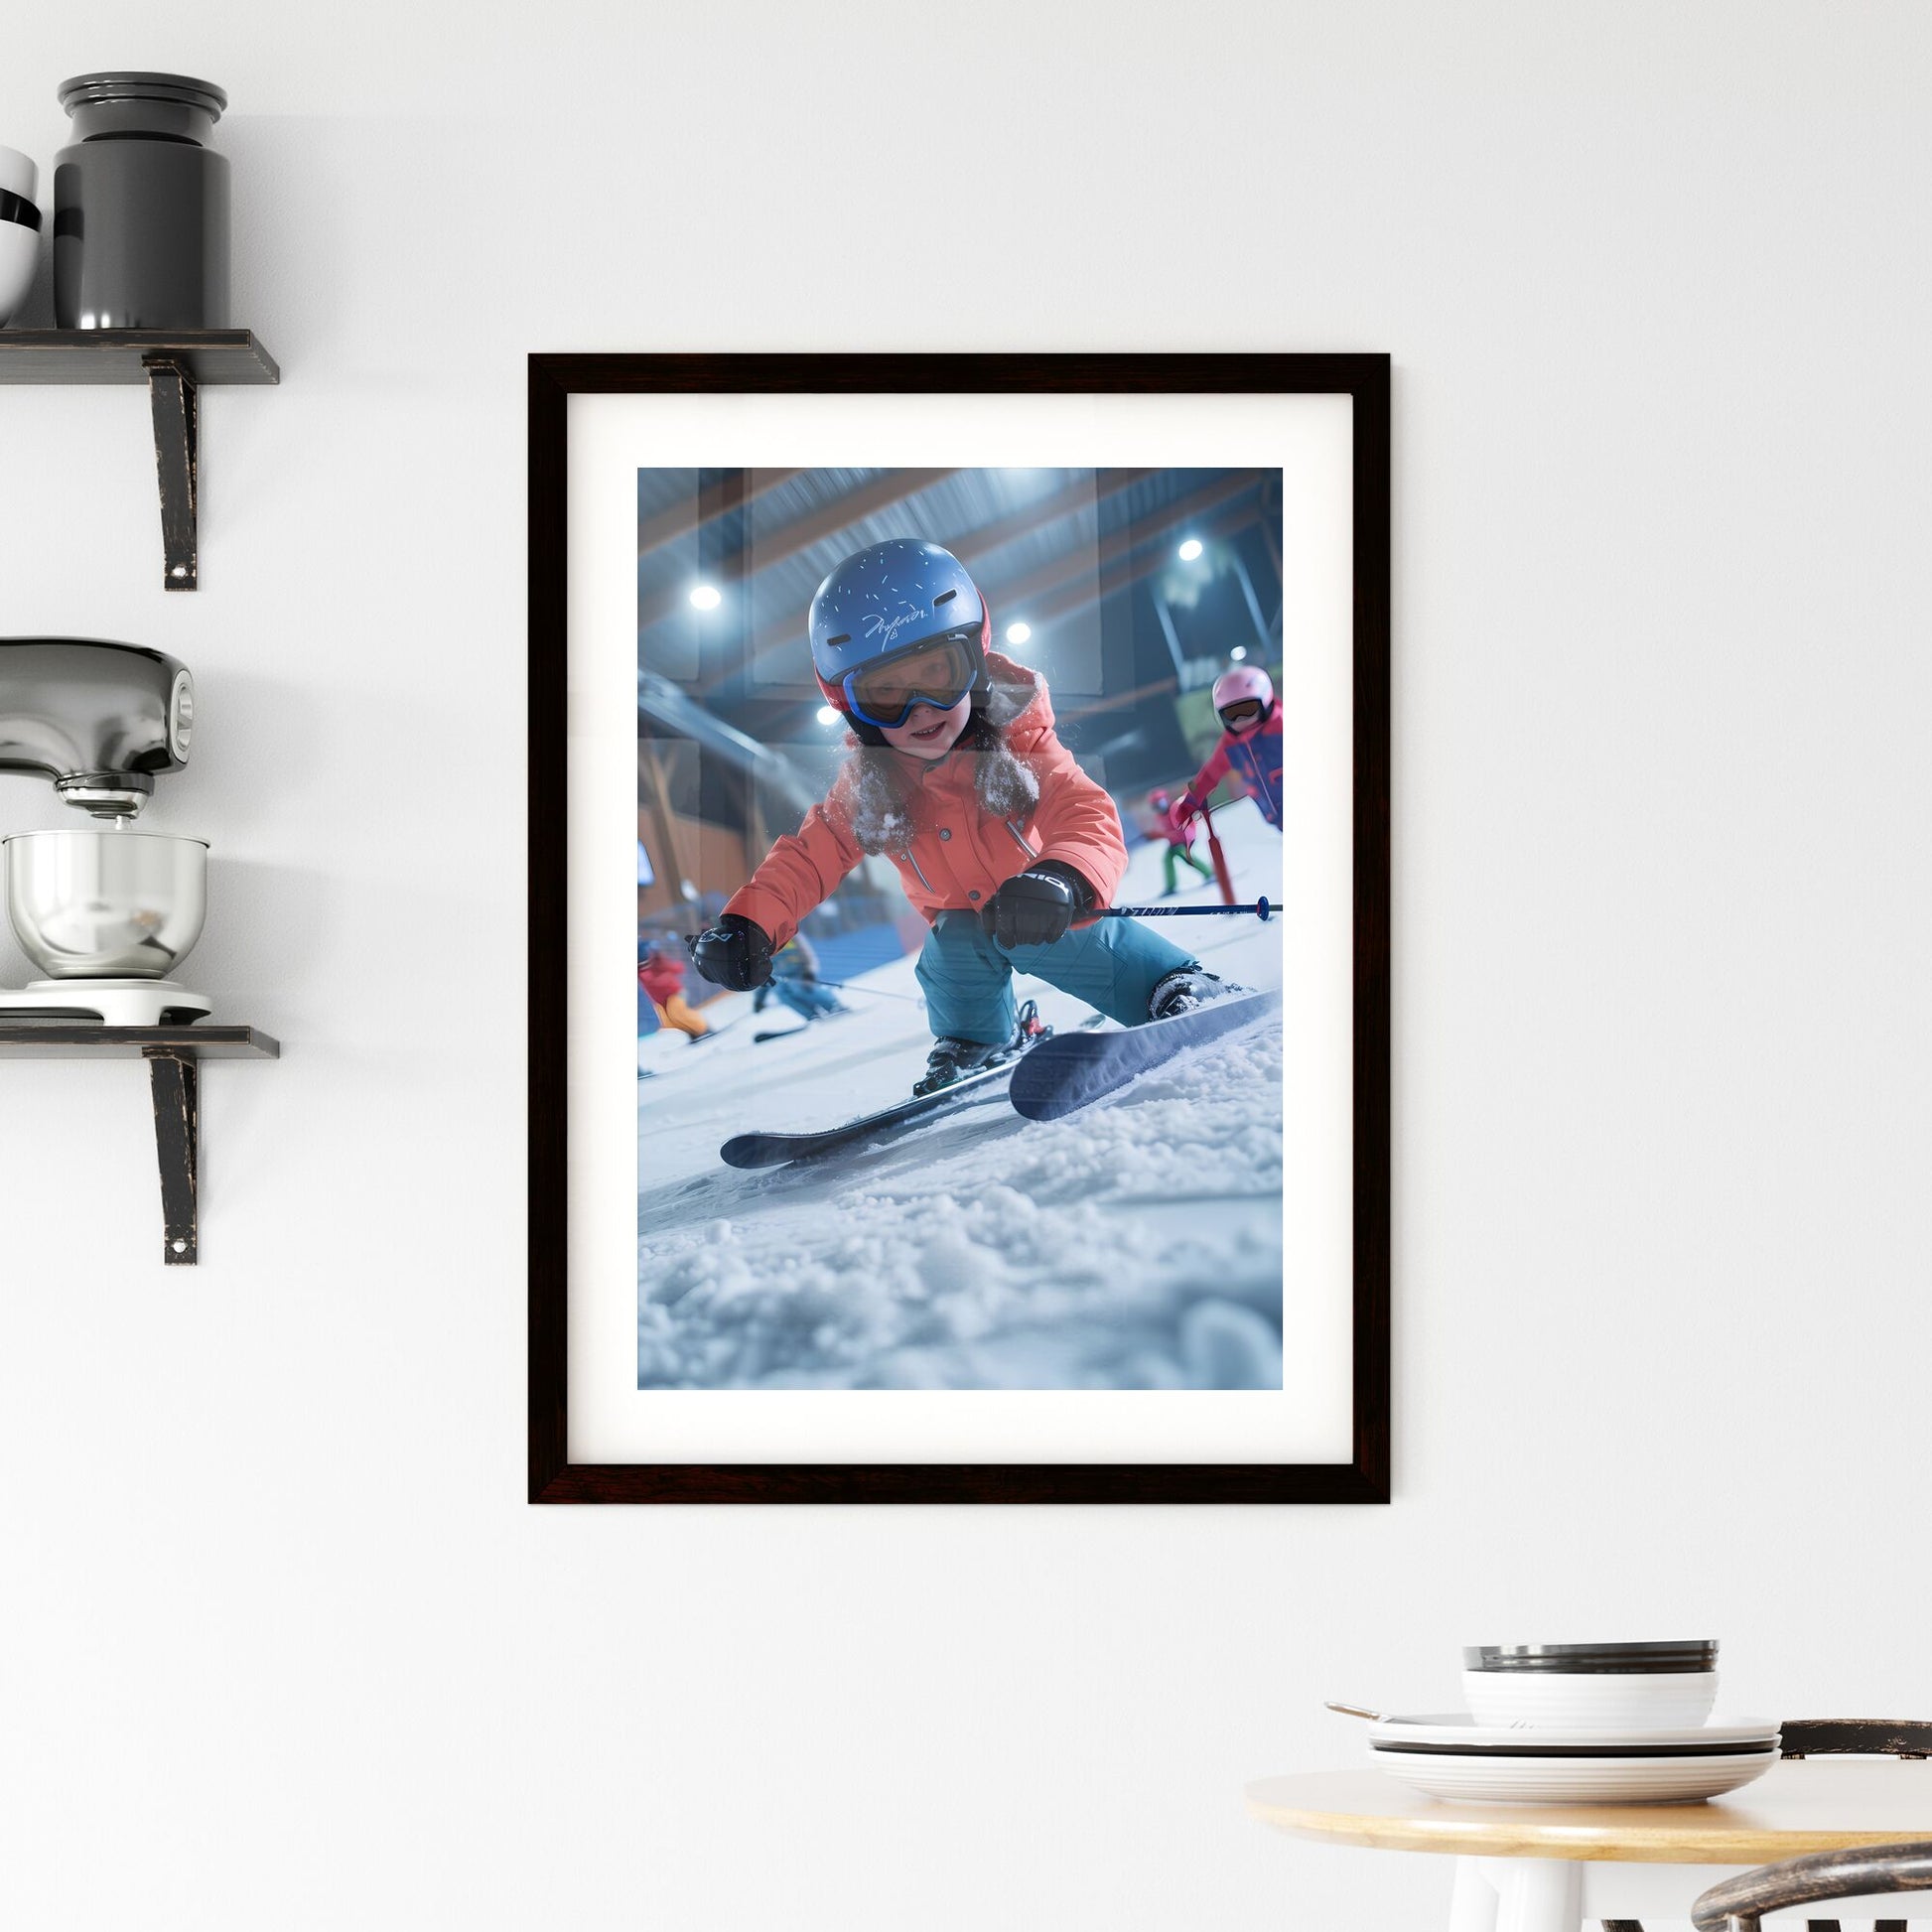 In the indoor ski resort, skiers gallop on the snow track - Art print of a girl in a helmet and skis Default Title